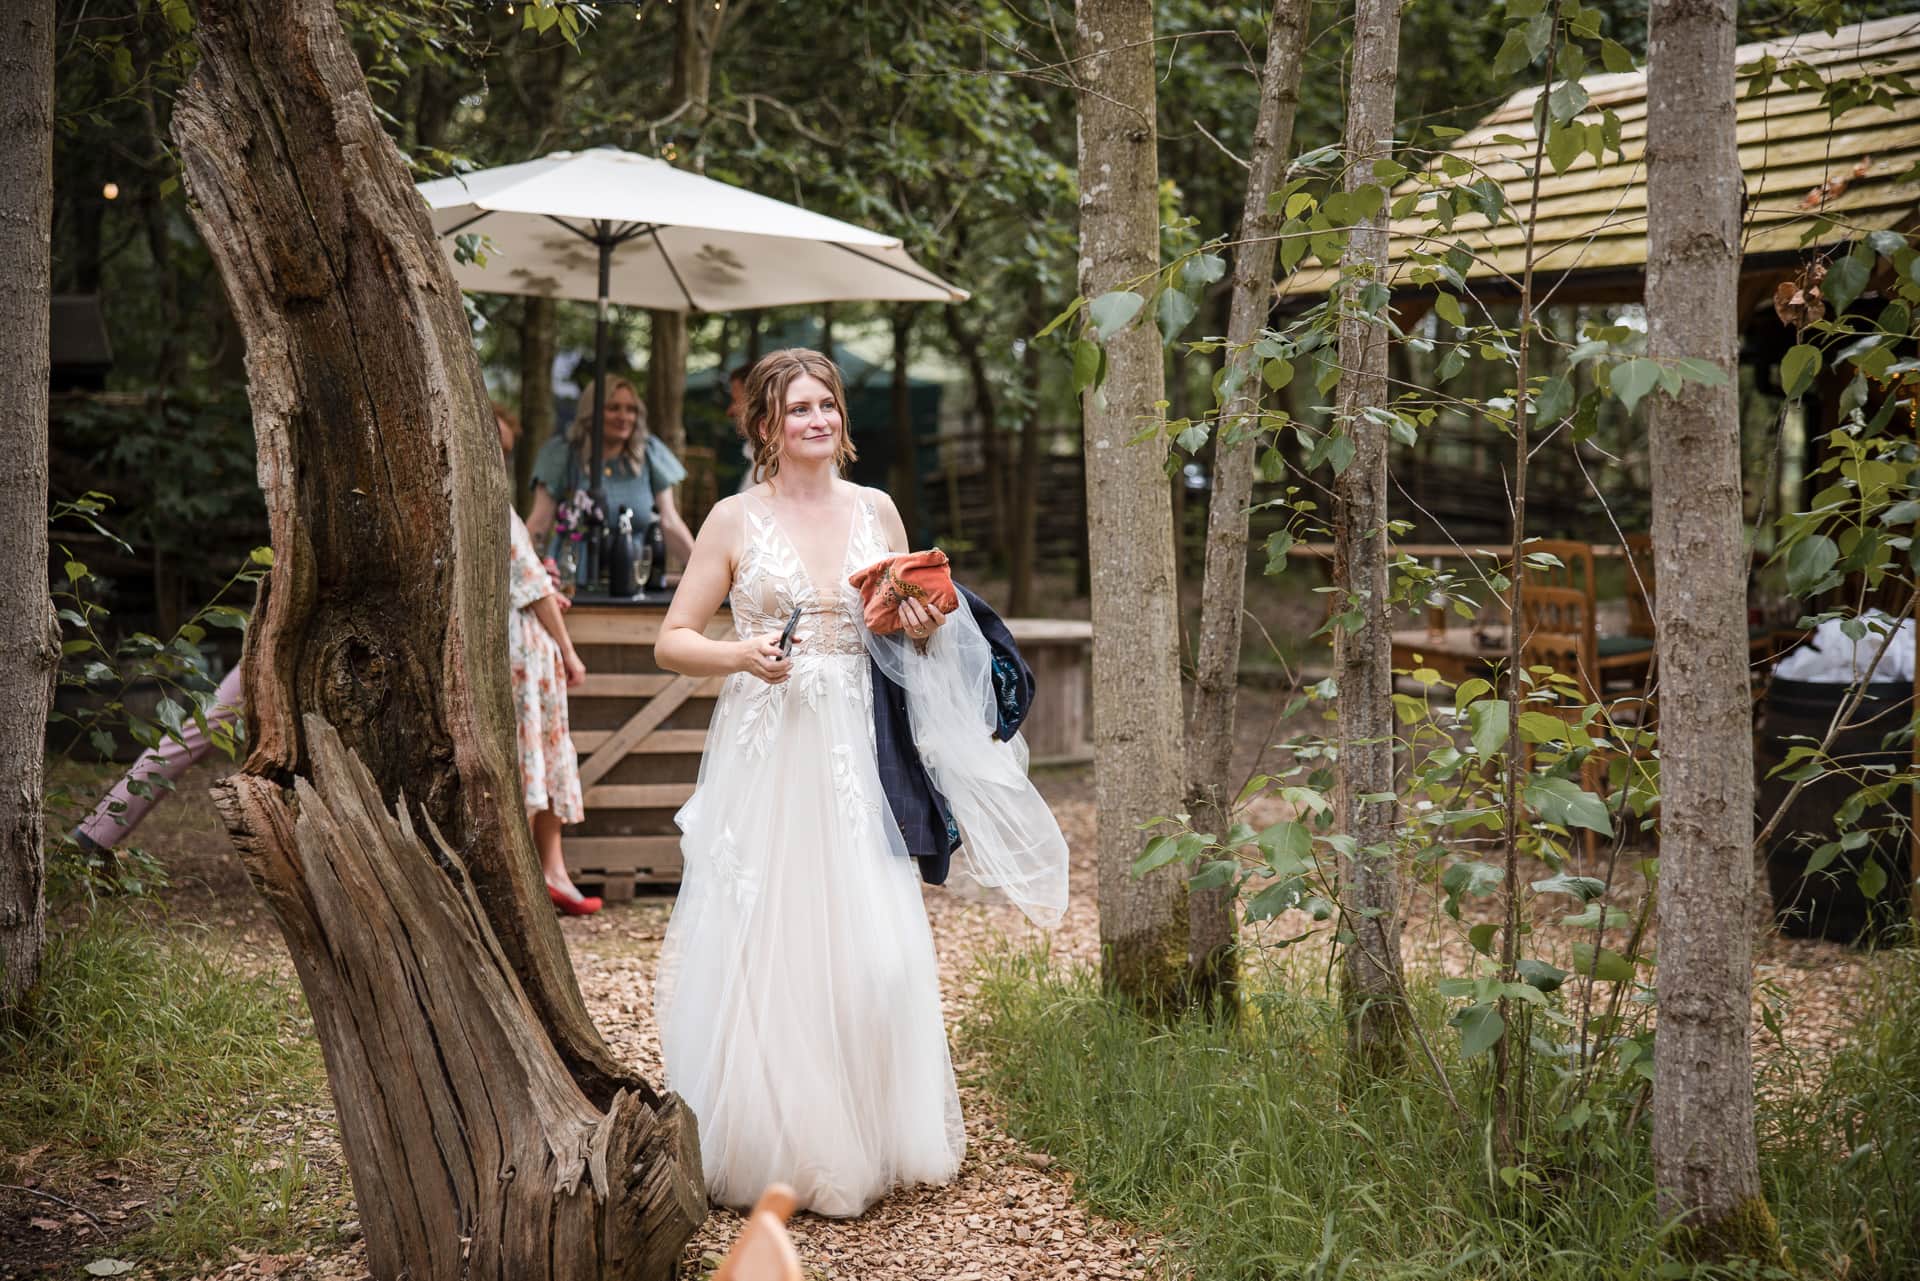 Bride walking within the trees at the Endeavour Woodland wedding venue